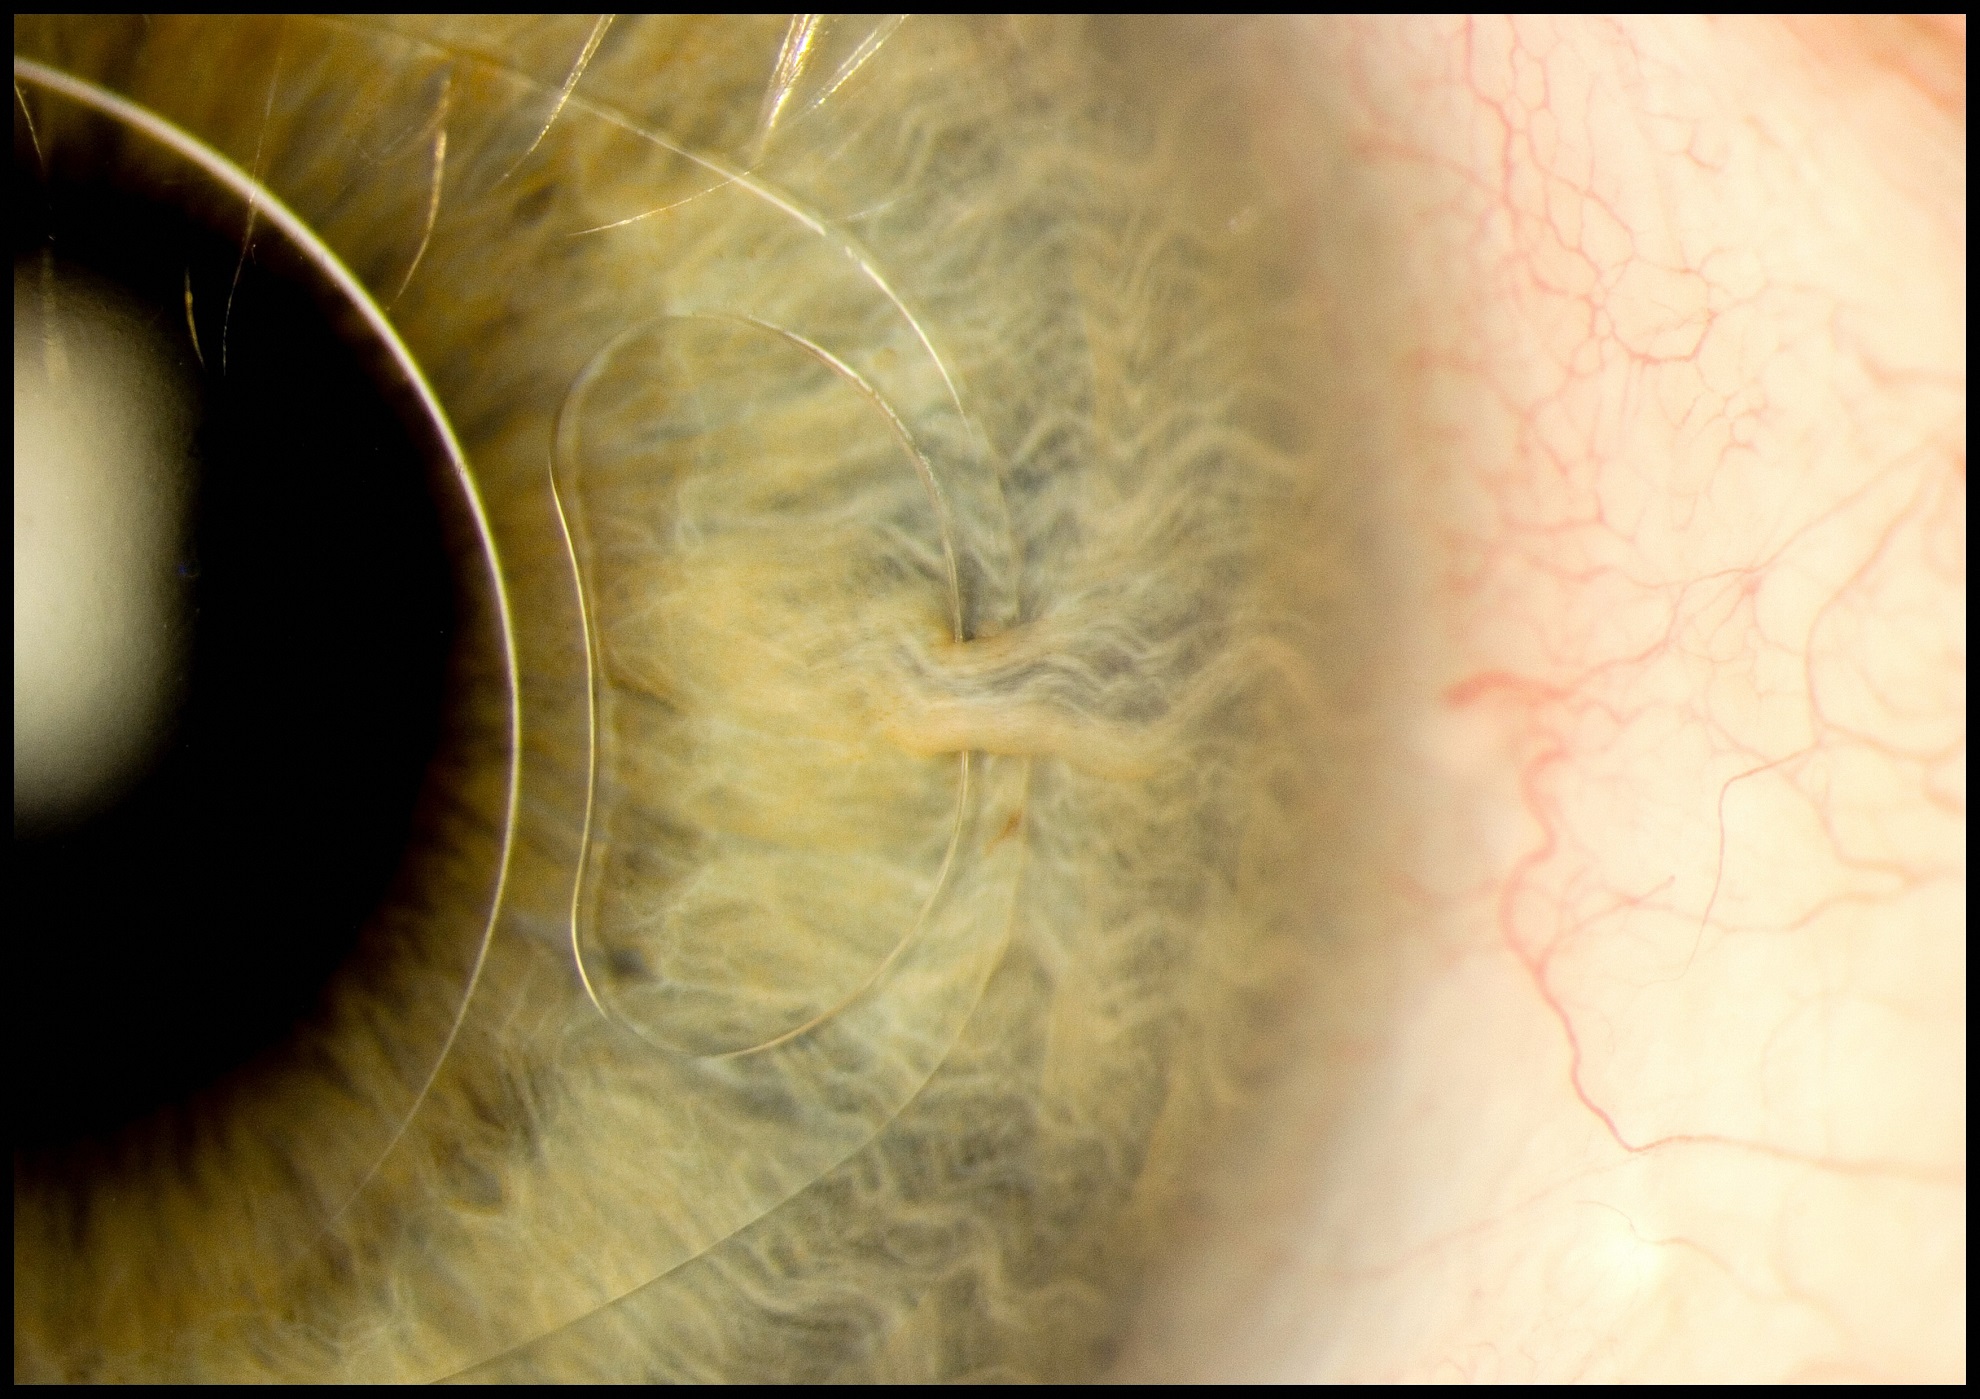 This image shows how an ‘iris clip’, also known as an artificial intraocular lens (IOL), is fitted onto the eye. An iris clip is a small, thin lens made from silicone or acrylic material, and has plastic side supports, called haptics, to hold it in place. An iris clip is fixed to the iris through a 3 mm surgical incision, and is used to treat conditions such as myopia (nearsightedness) and cataracts (cloudiness of the lens). This particular patient, a 70-year-old man, regained almost full vision following his surgery.